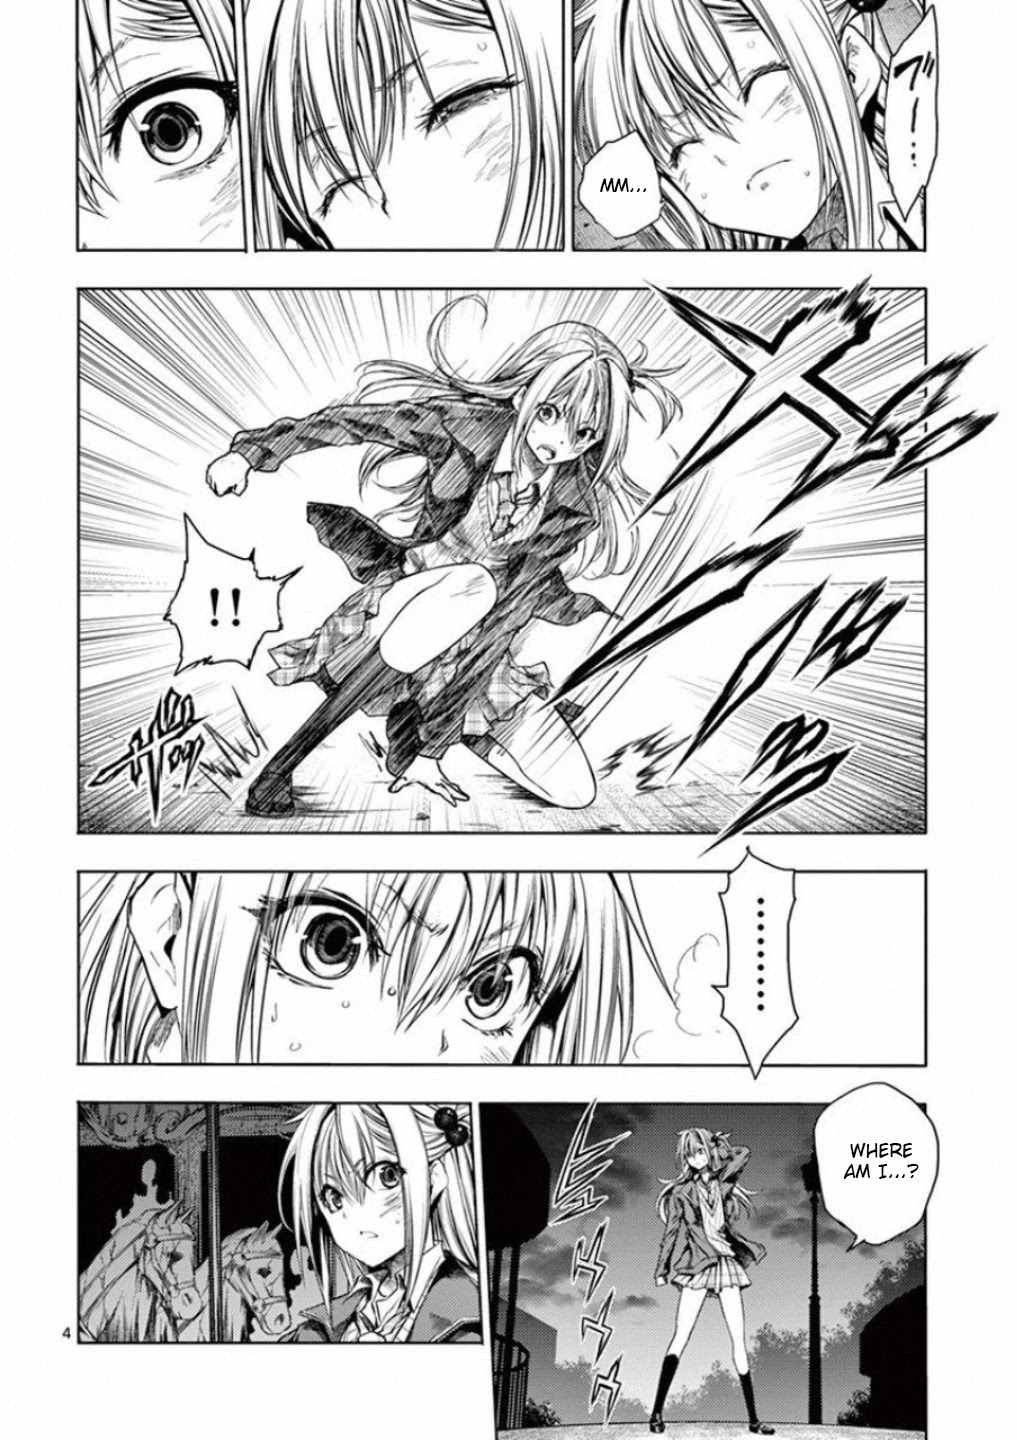 Battle in 5 Seconds After Meeting, Chapter 206.1 - Battle in 5 Seconds  After Meeting Manga Online